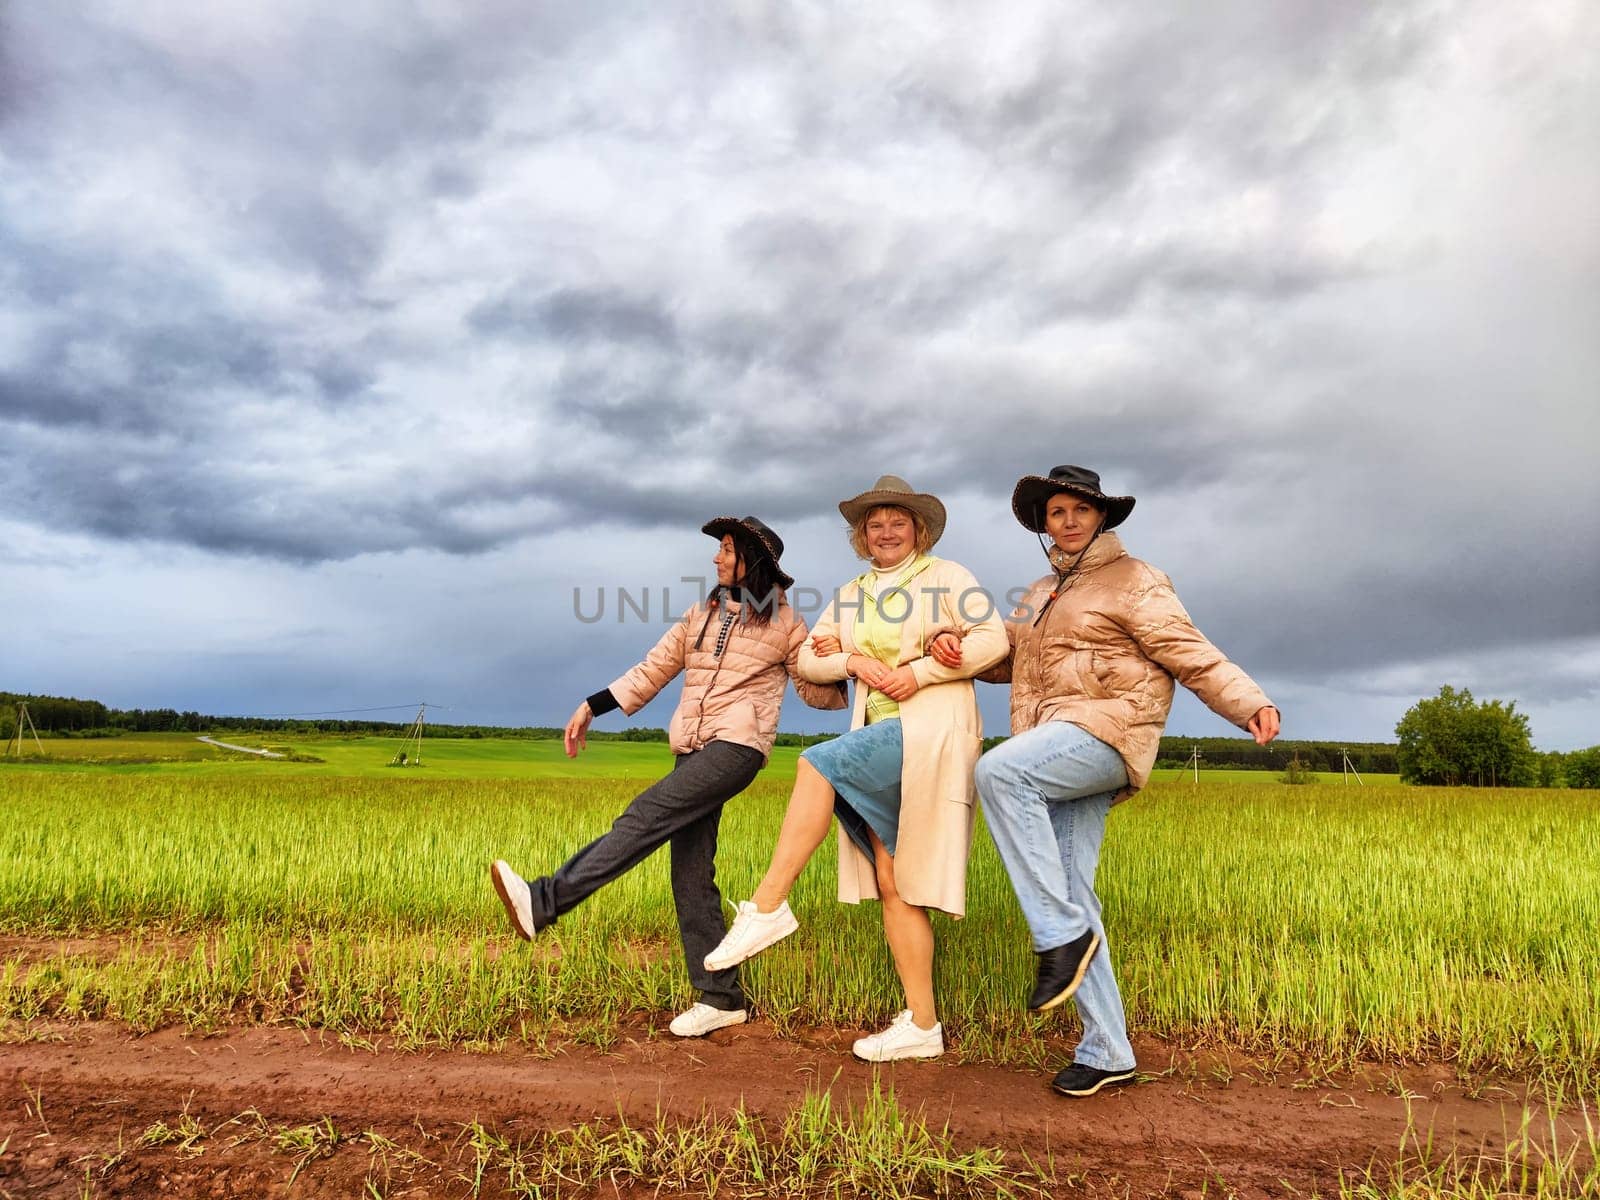 Adult girls looking like a cowboys in hats in a field and with a stormy sky with clouds posing in the rain. Women having fun outdoors on rural and rustic nature